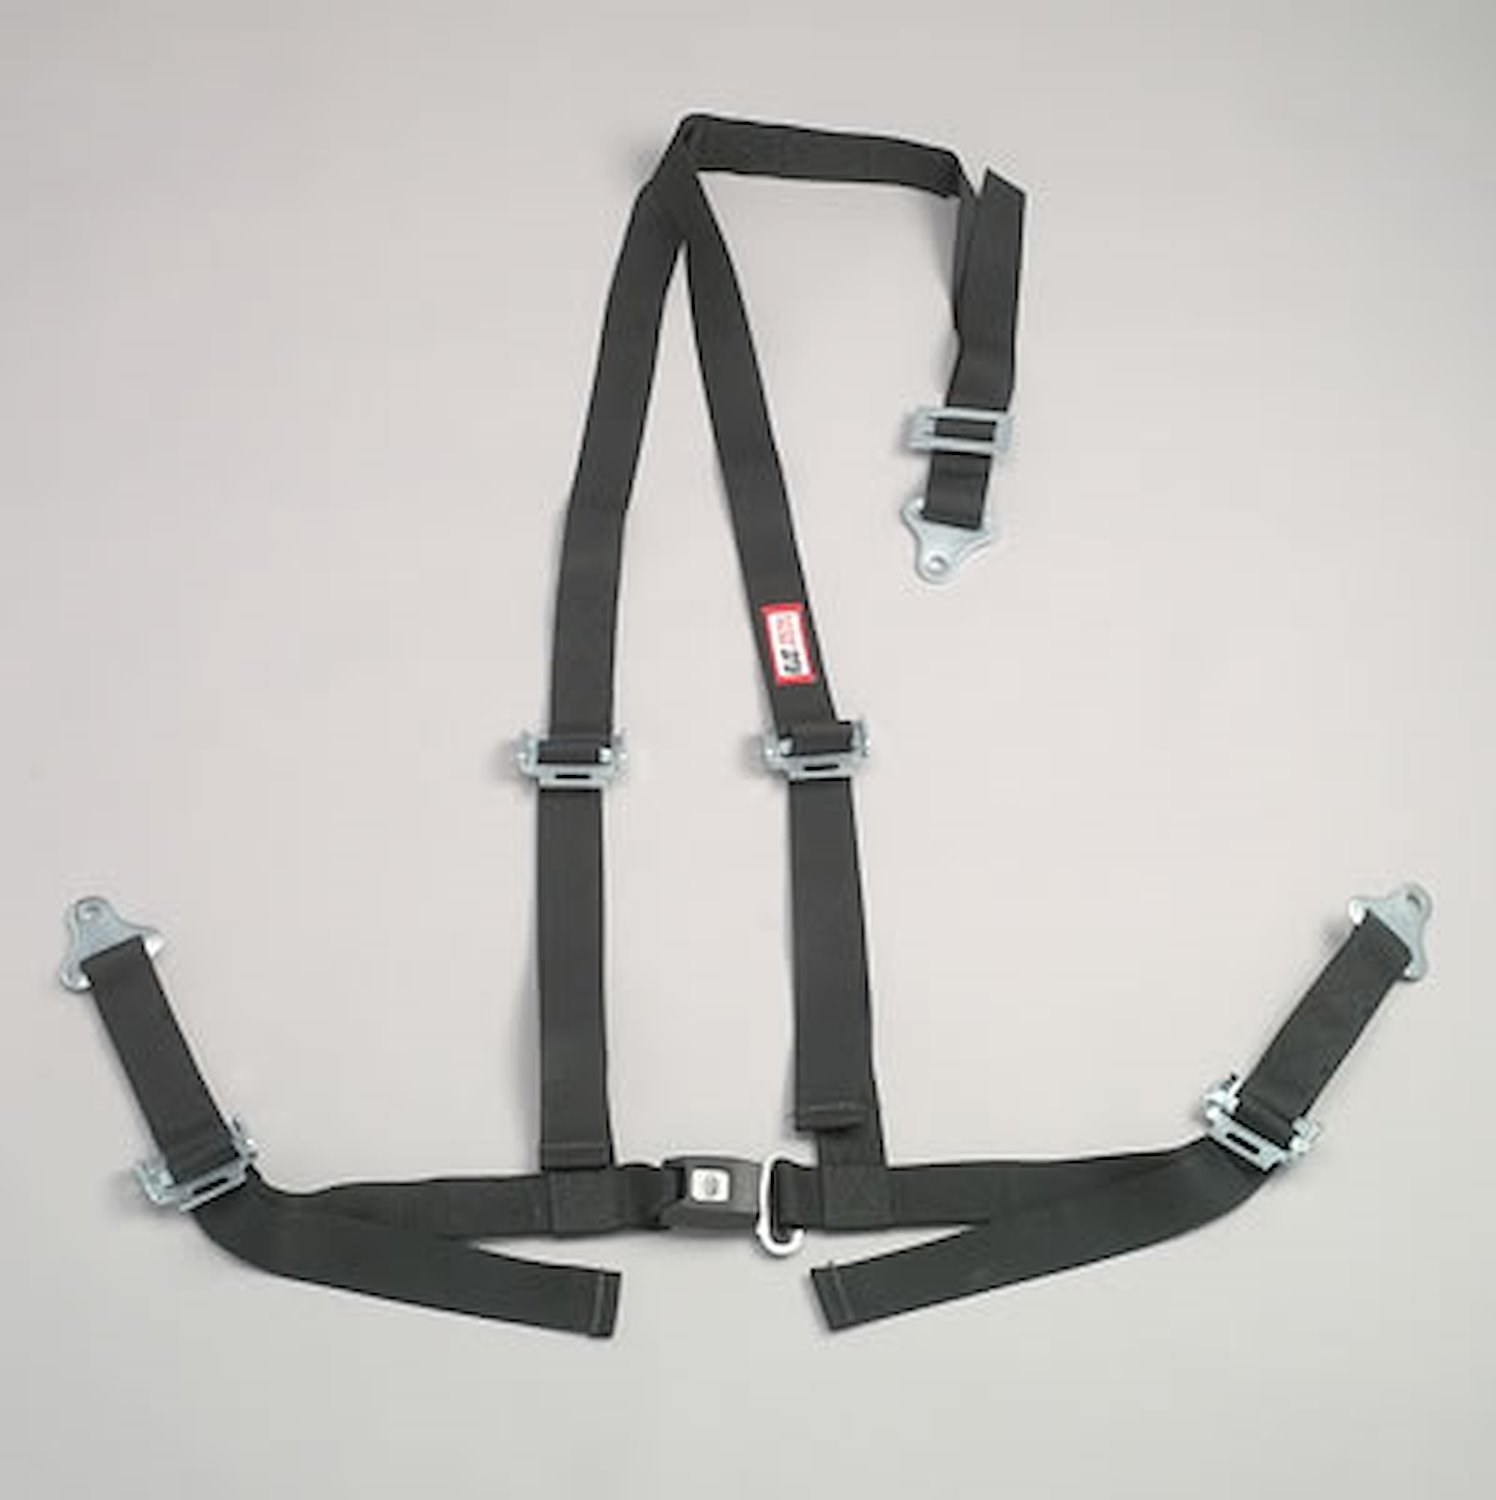 NON-SFI B&T HARNESS 2 PULL DOWN Lap Belt 2 S. H. Individual FLOOR Mount ALL WRAP ENDS w/STERNUM STRAP YELLOW